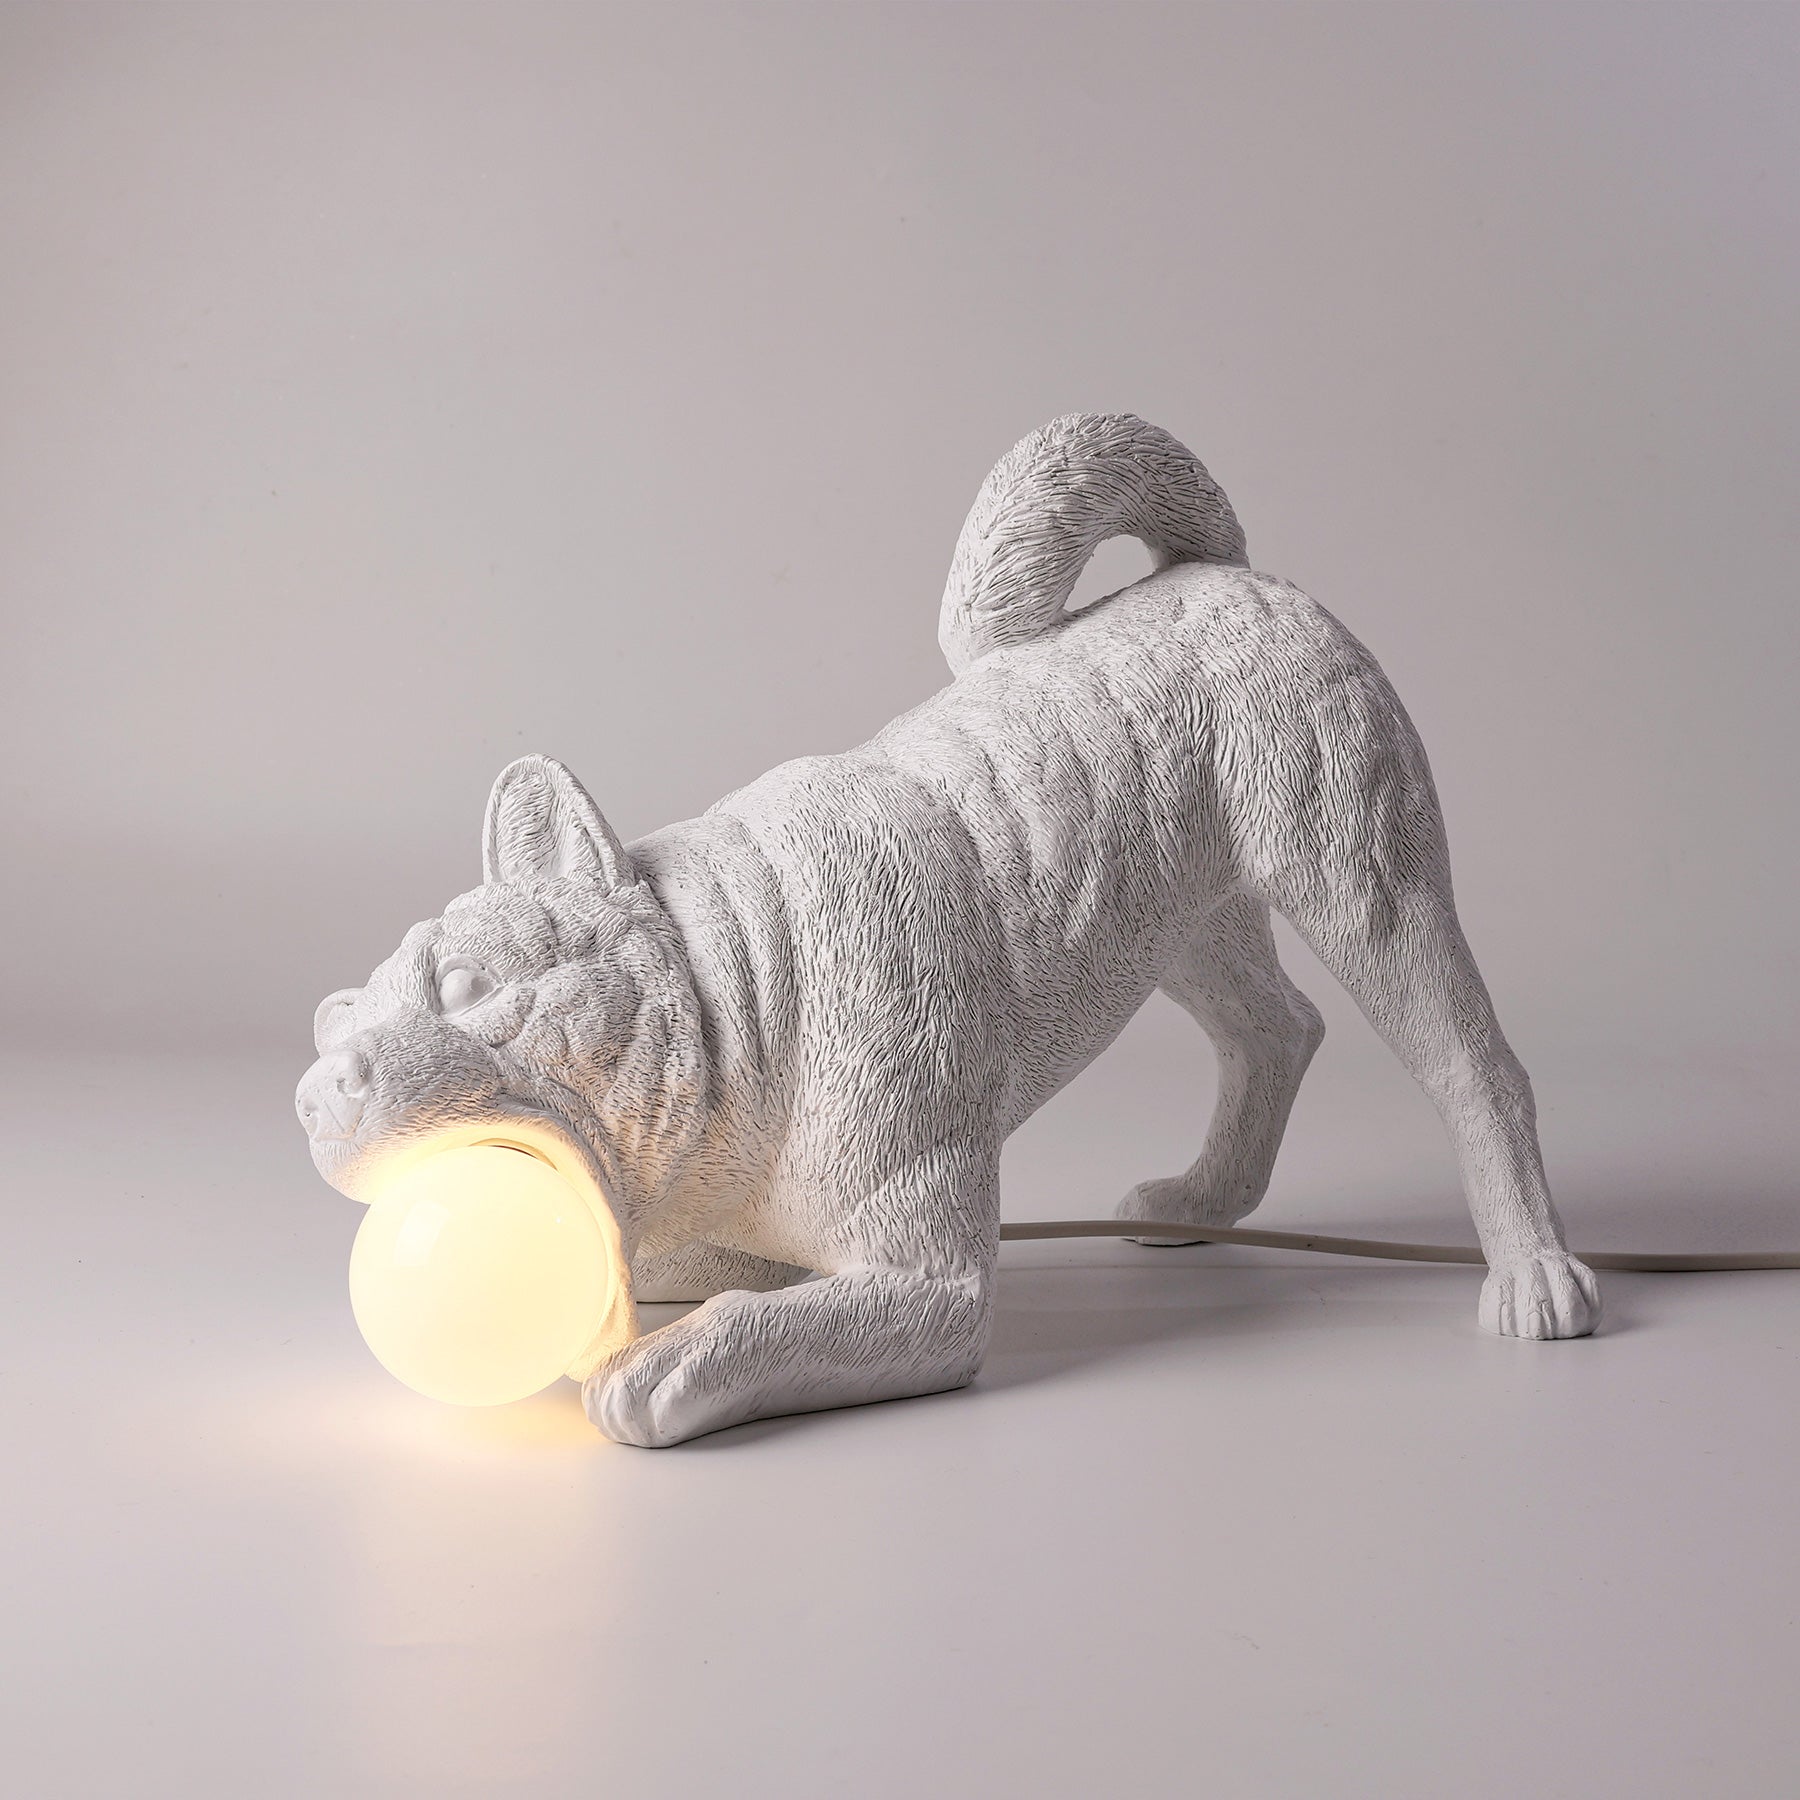 Dog lamp and it's statue: I need some play and you need some light!